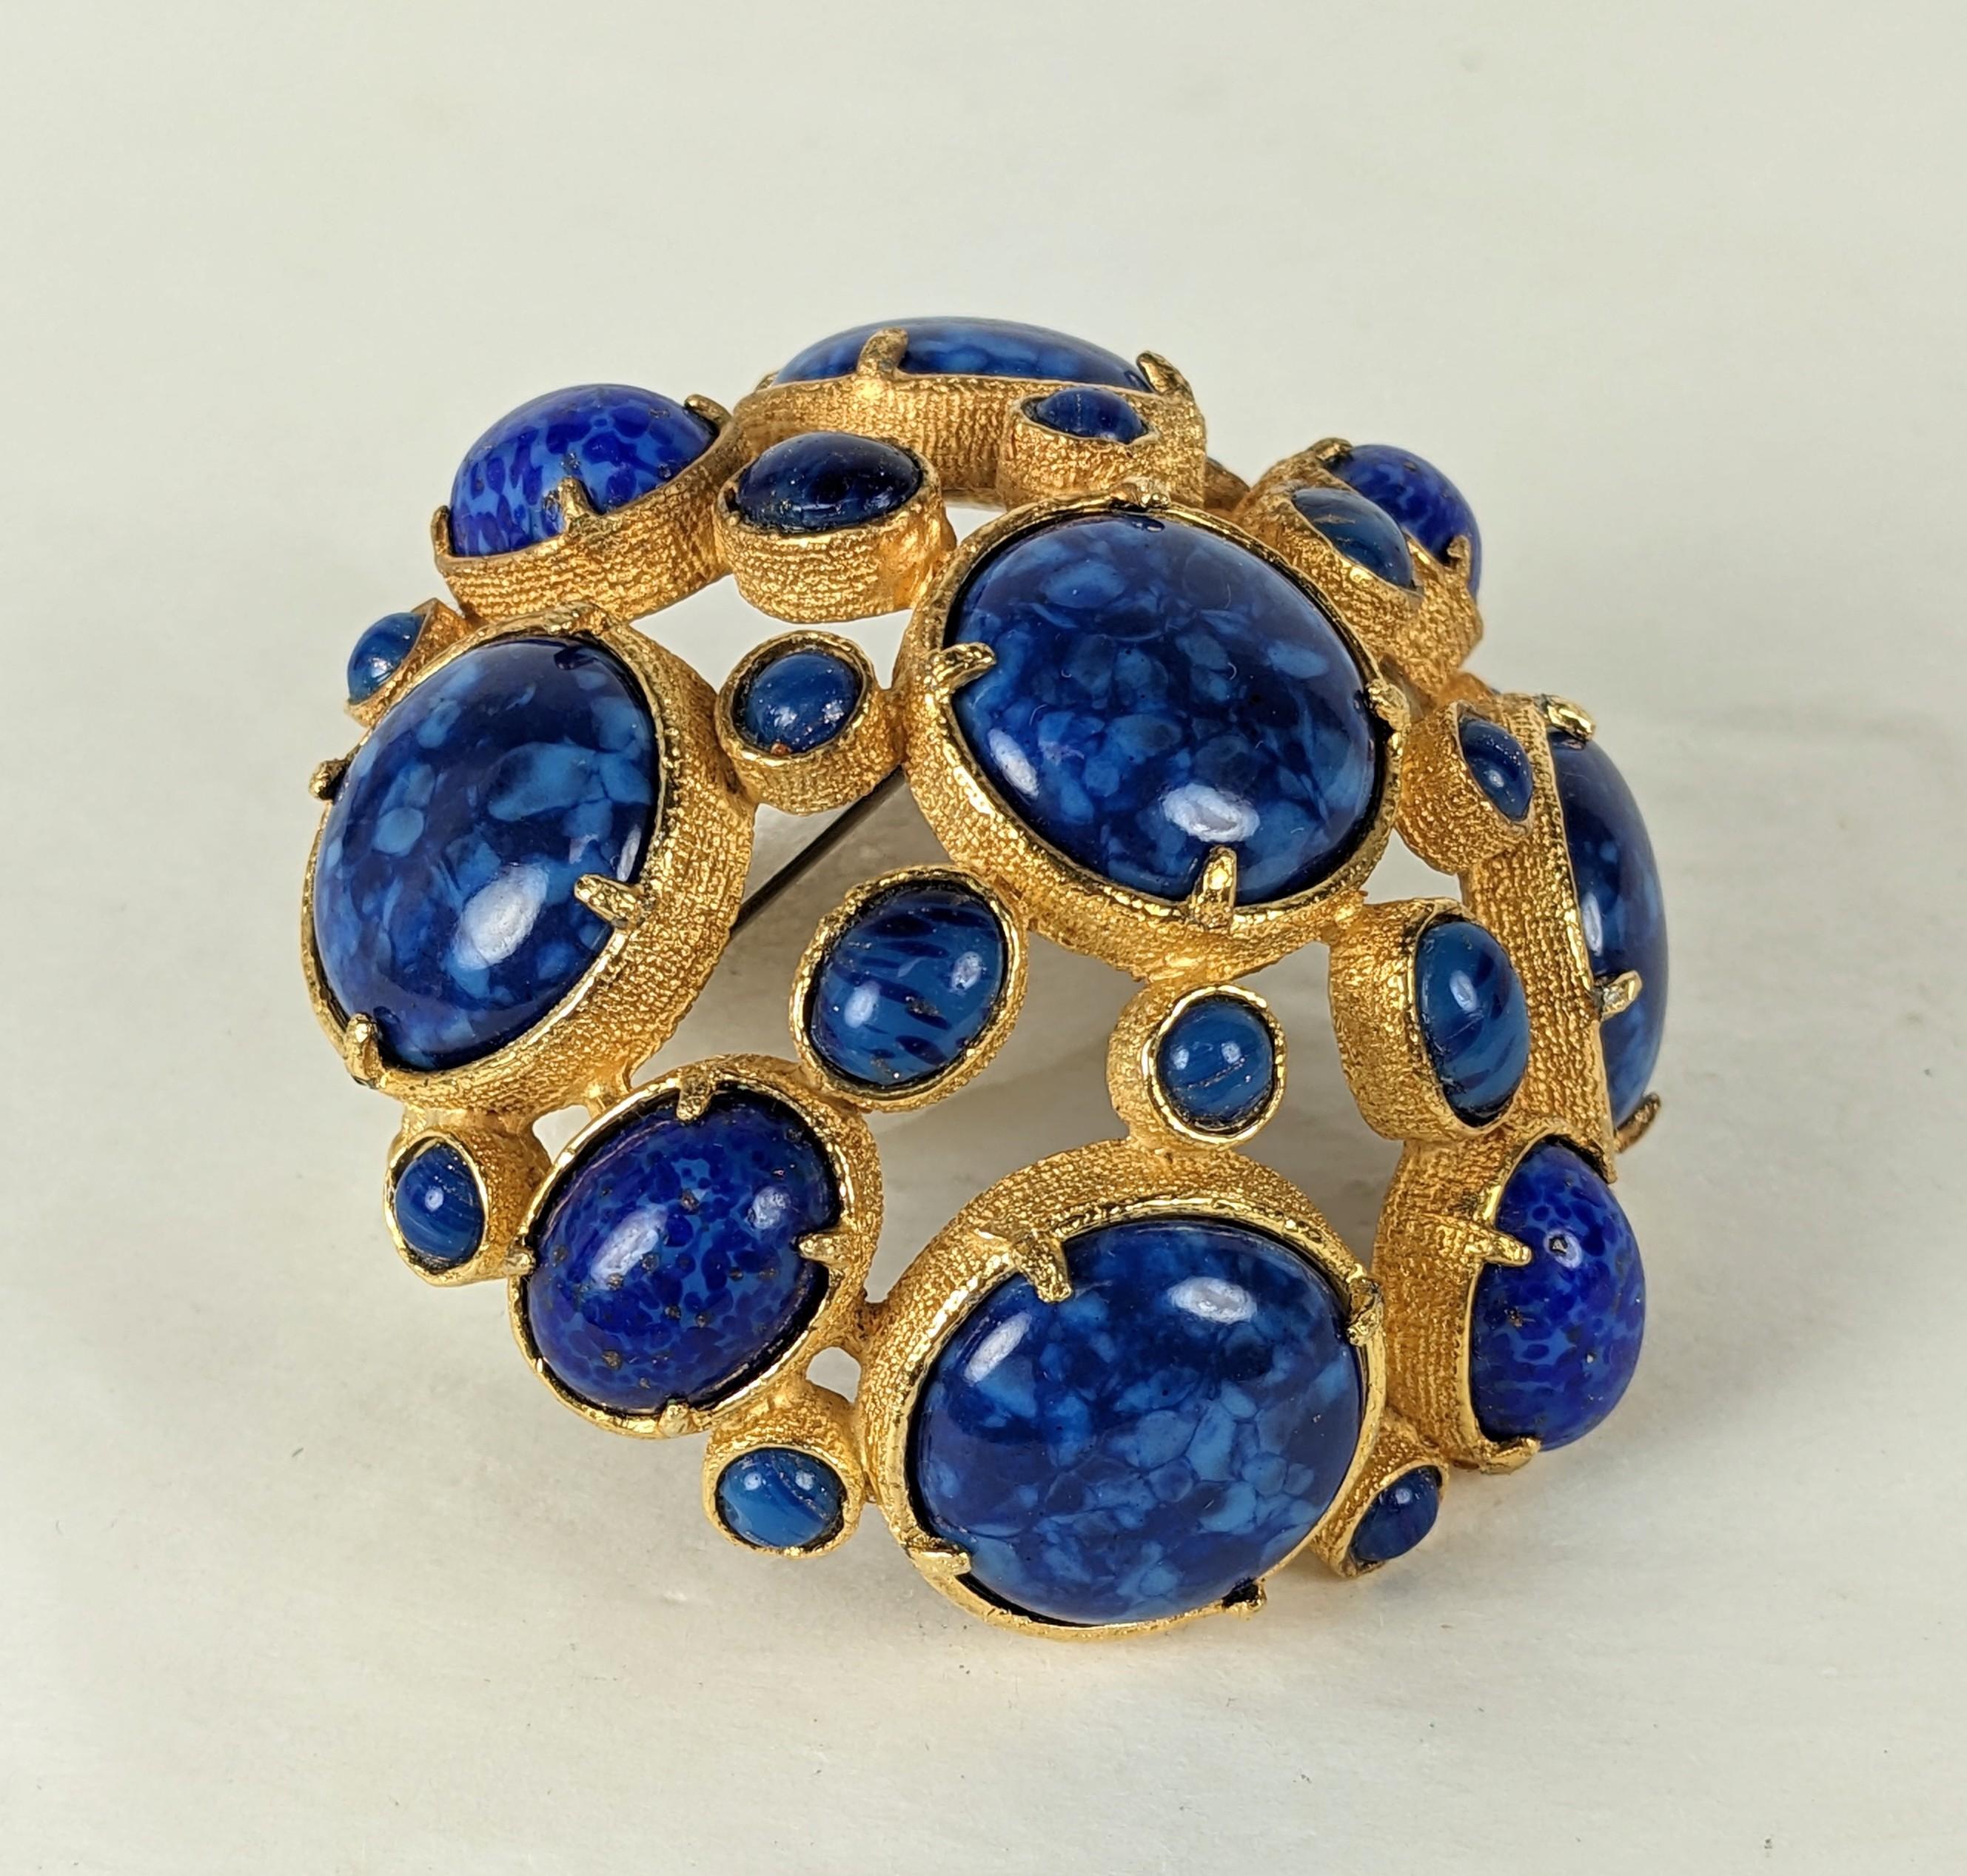 Attractive Kenneth Jay lane Faux Lapis Domed Crest Brooch. Faux lapis cabs are open set into textured matte gold metal , 1960's USA. Signed. 2.4